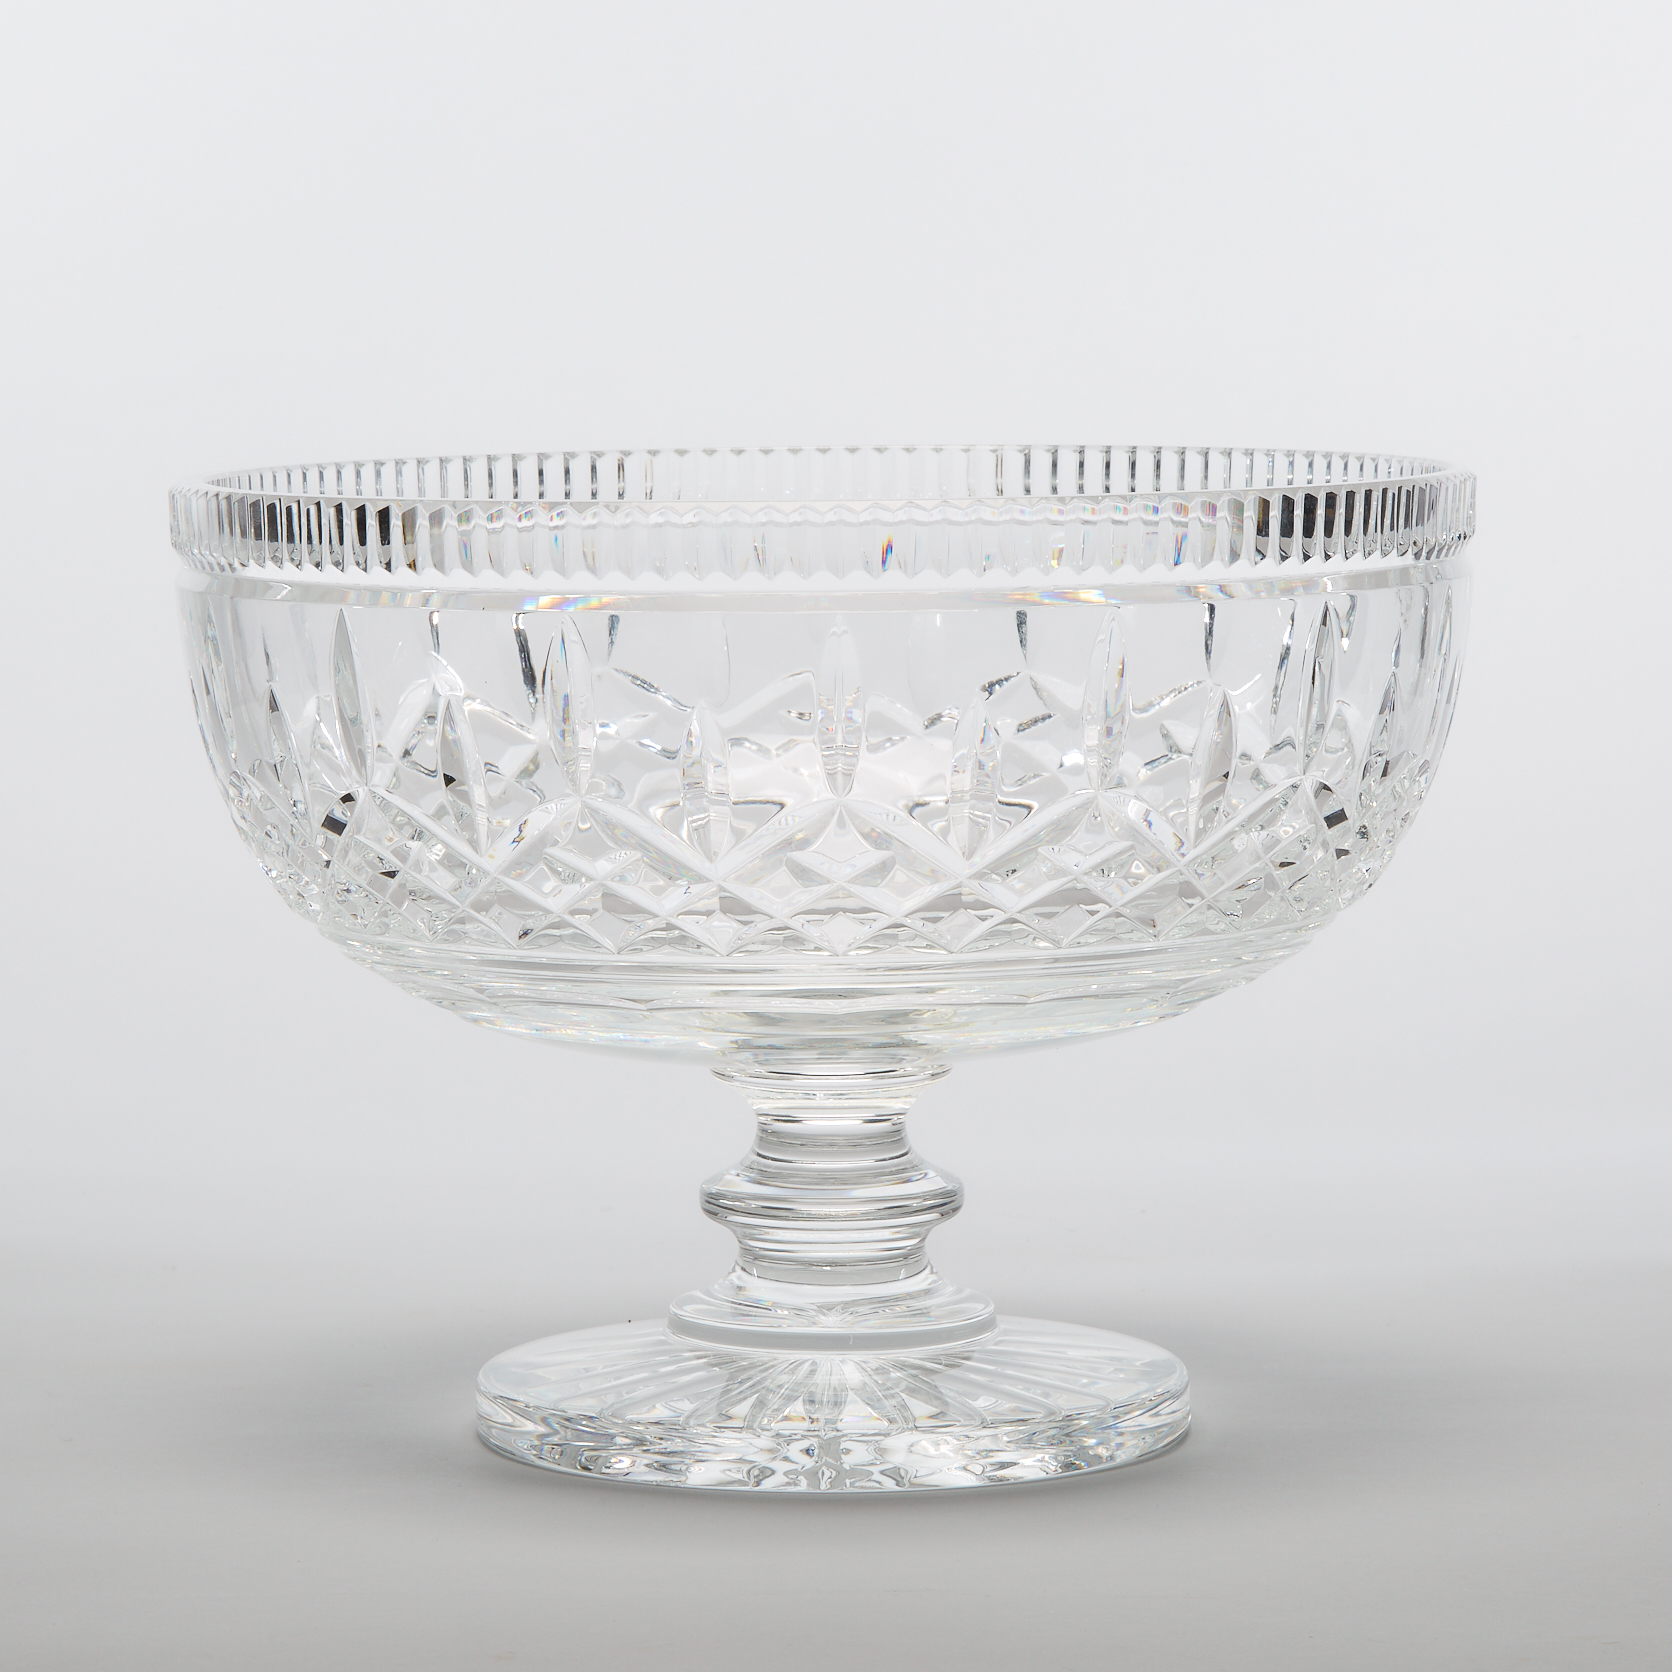 Waterford Pedestal-Footed Bowl, 20th century